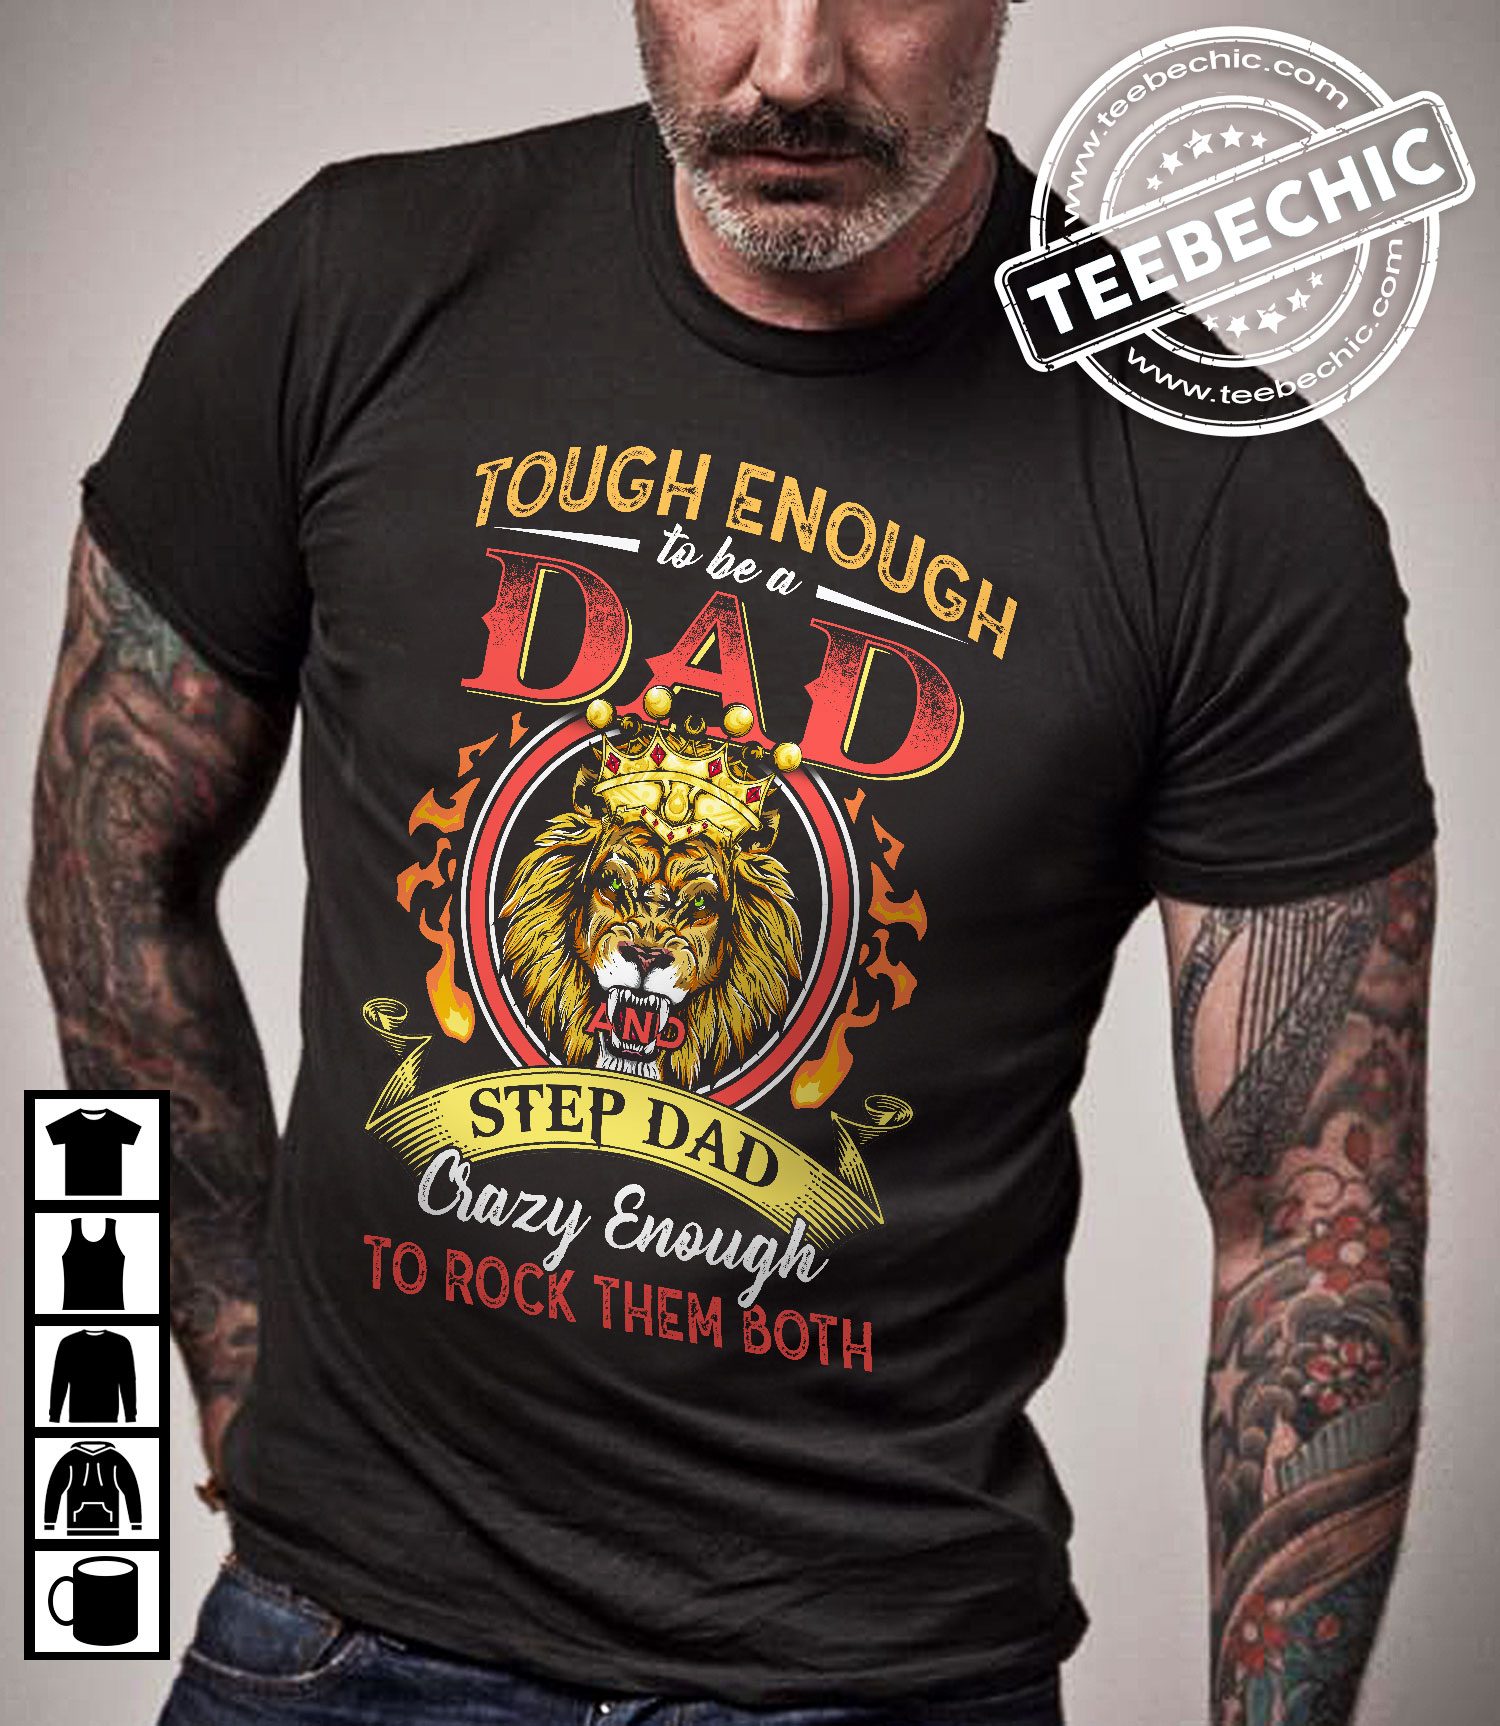 Touch enough to be a dad & step dad crazy enough - Lion king with crown